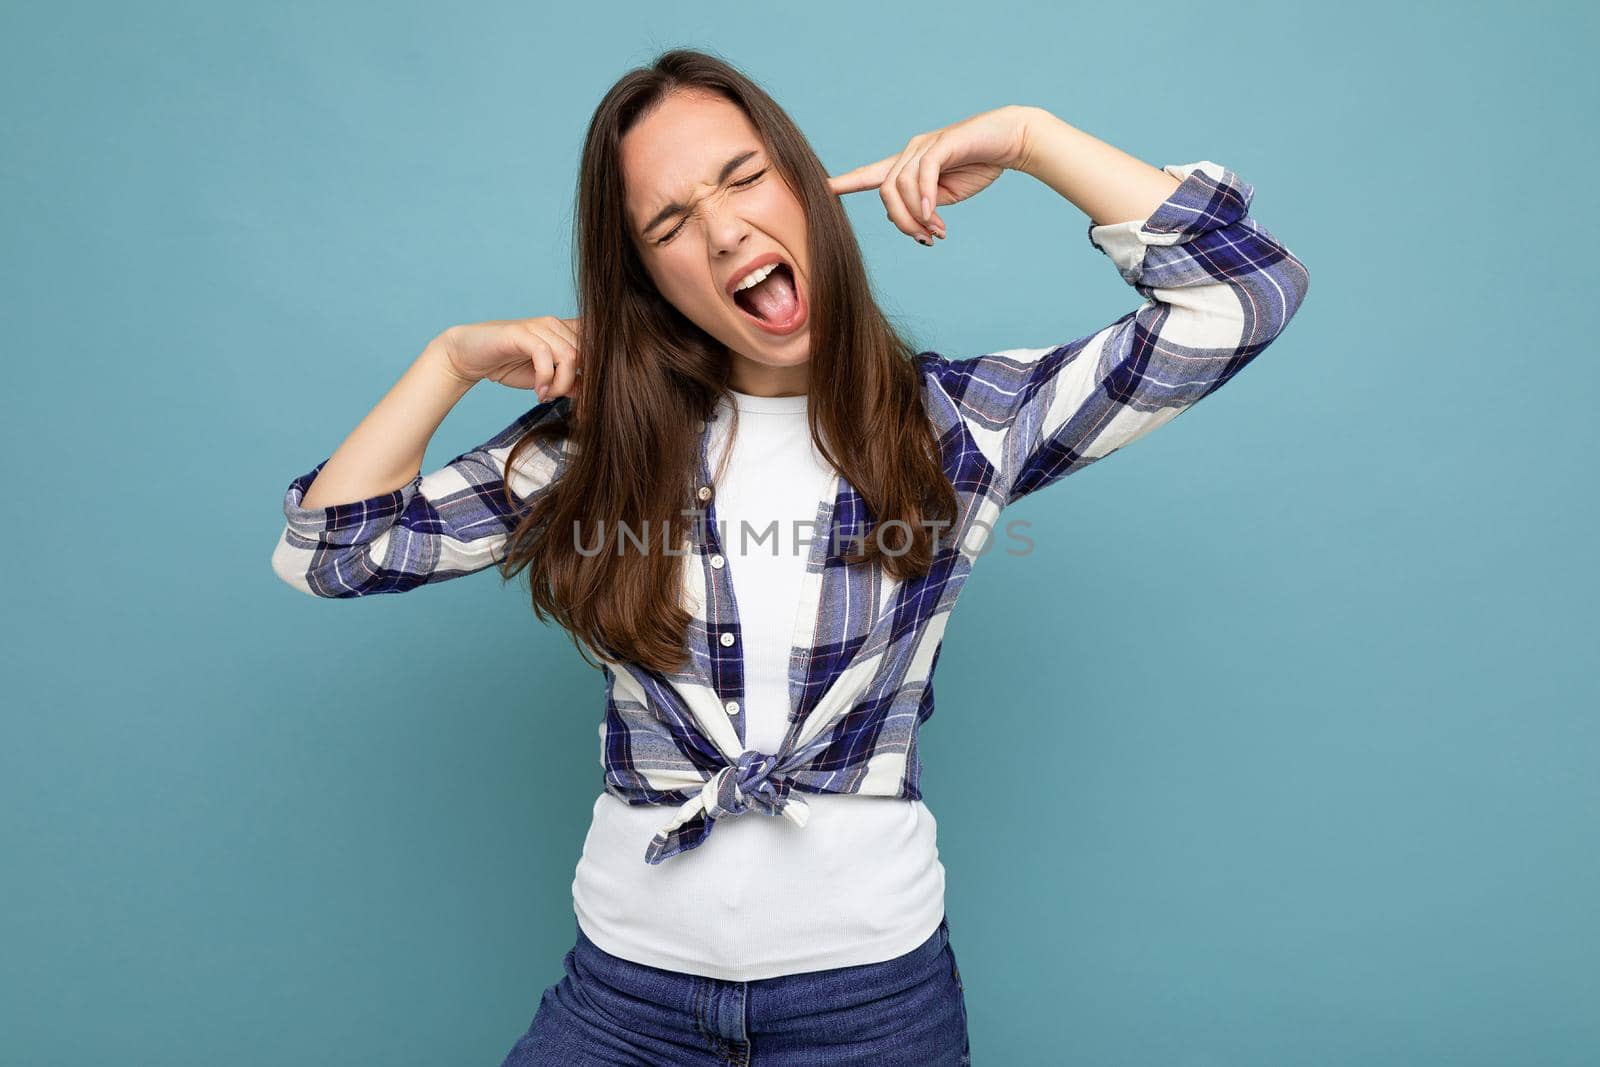 Don't want tfemale person isolated on blue background with copy space and covering ears and shouting.